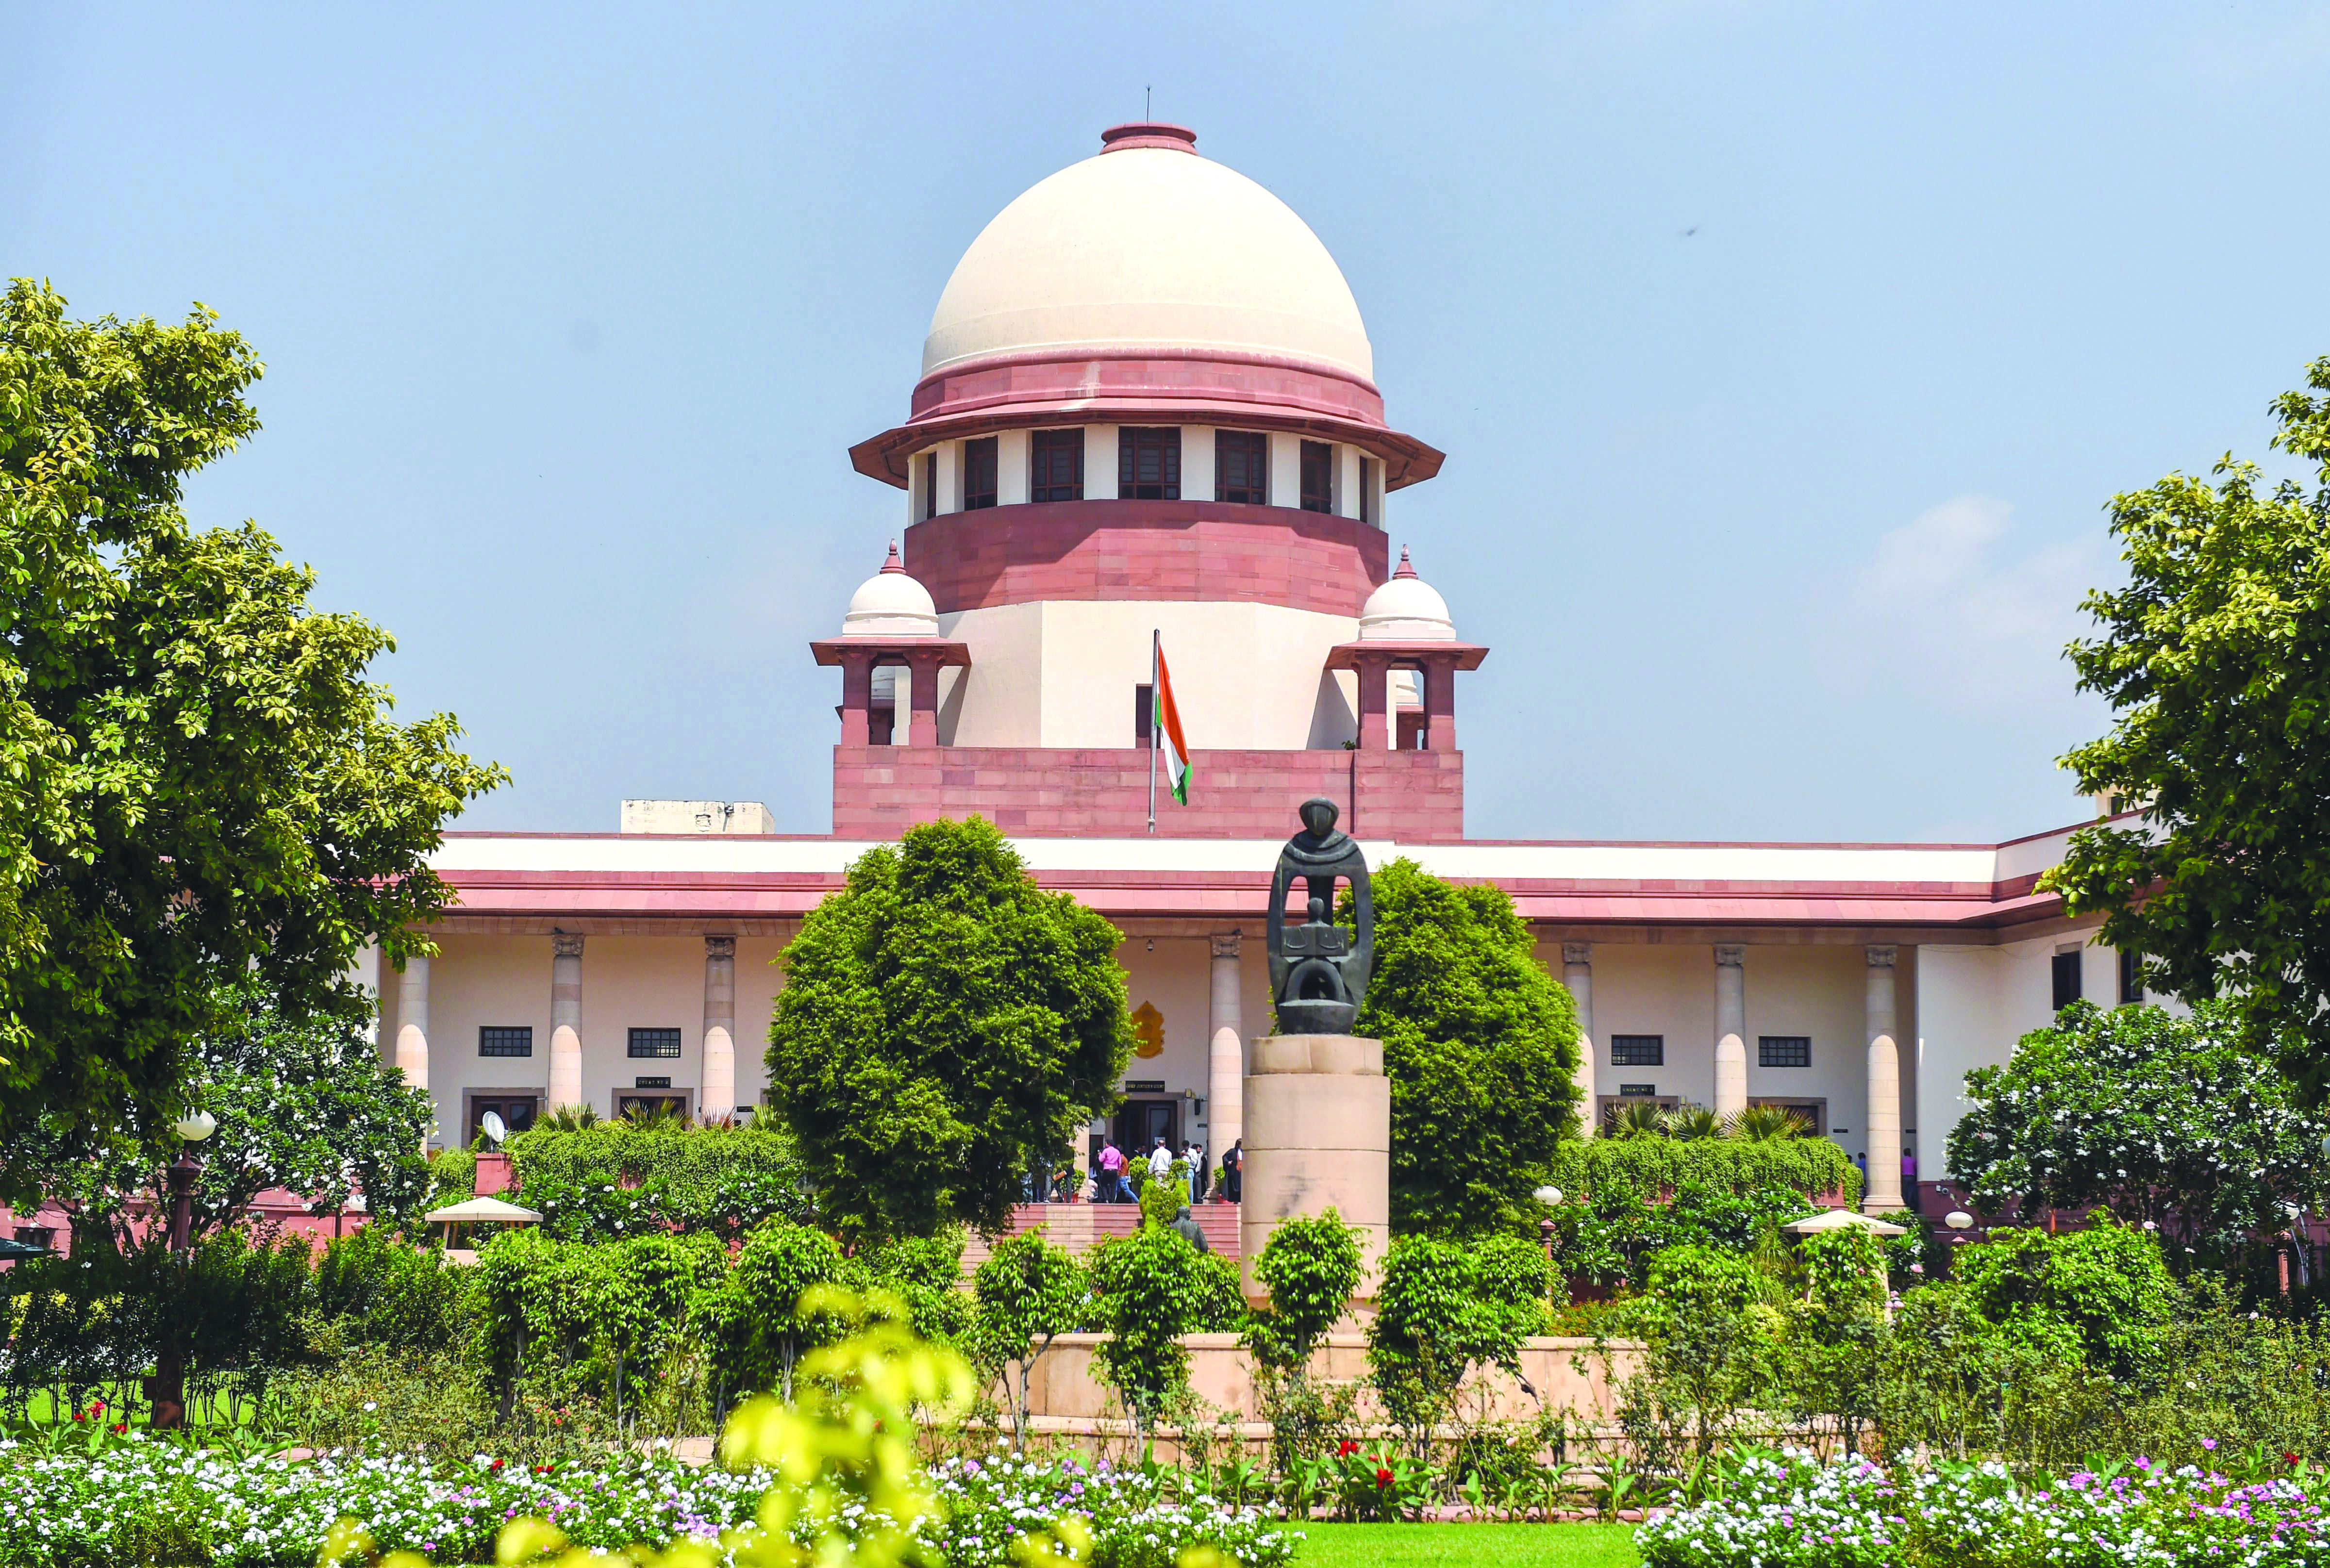 Mere non-cooperation to ED summons not ground for arrest under PMLA: SC